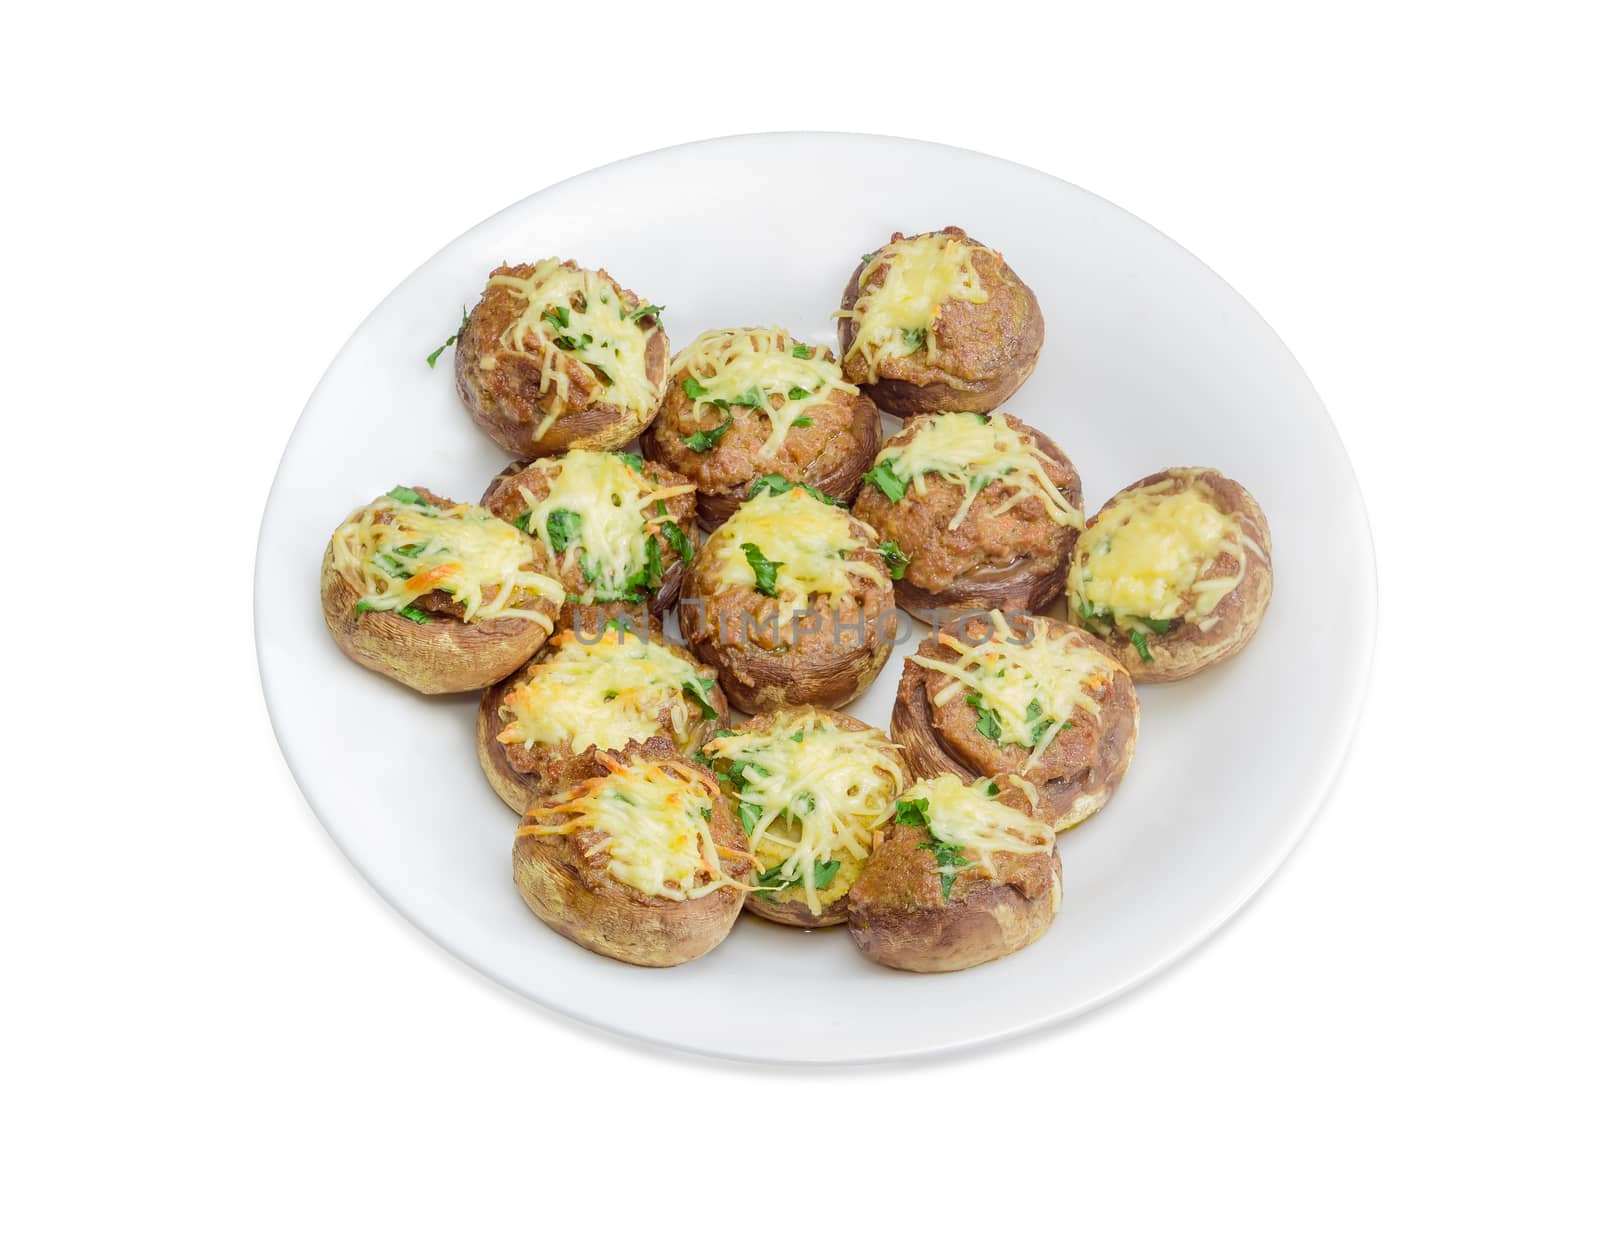 Baked button mushrooms stuffed with minced meat, cheese and greens on the white dish on a light background
